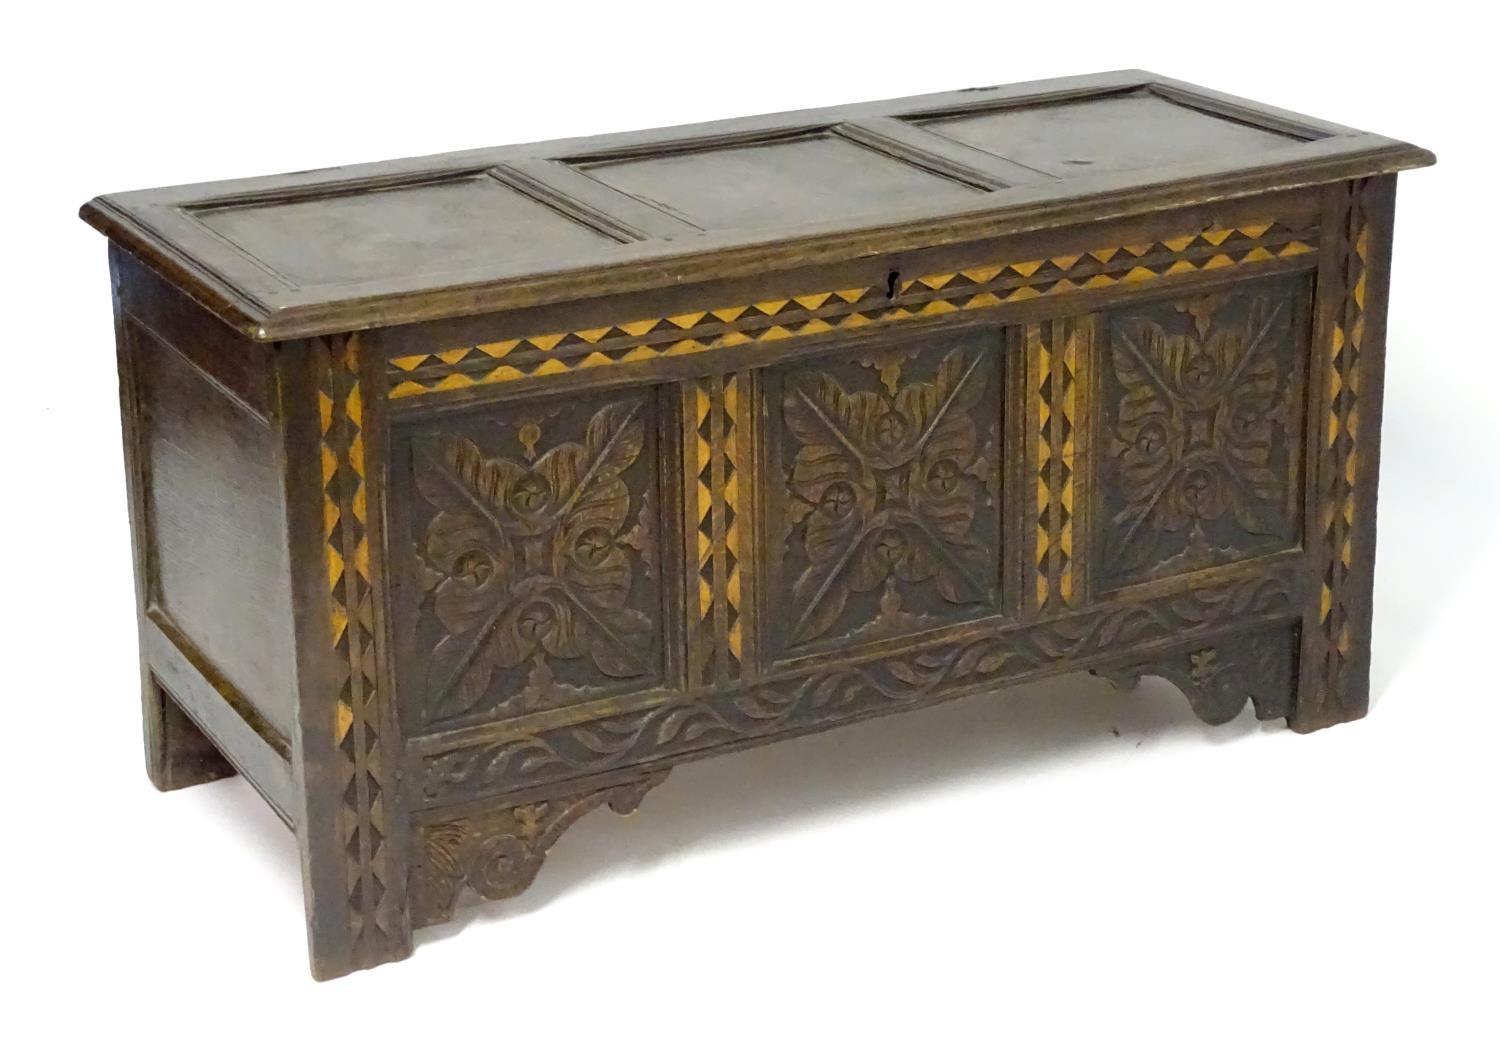 A 17thC oak three panel coffer with a moulded lid above carved panelling to the front with floral